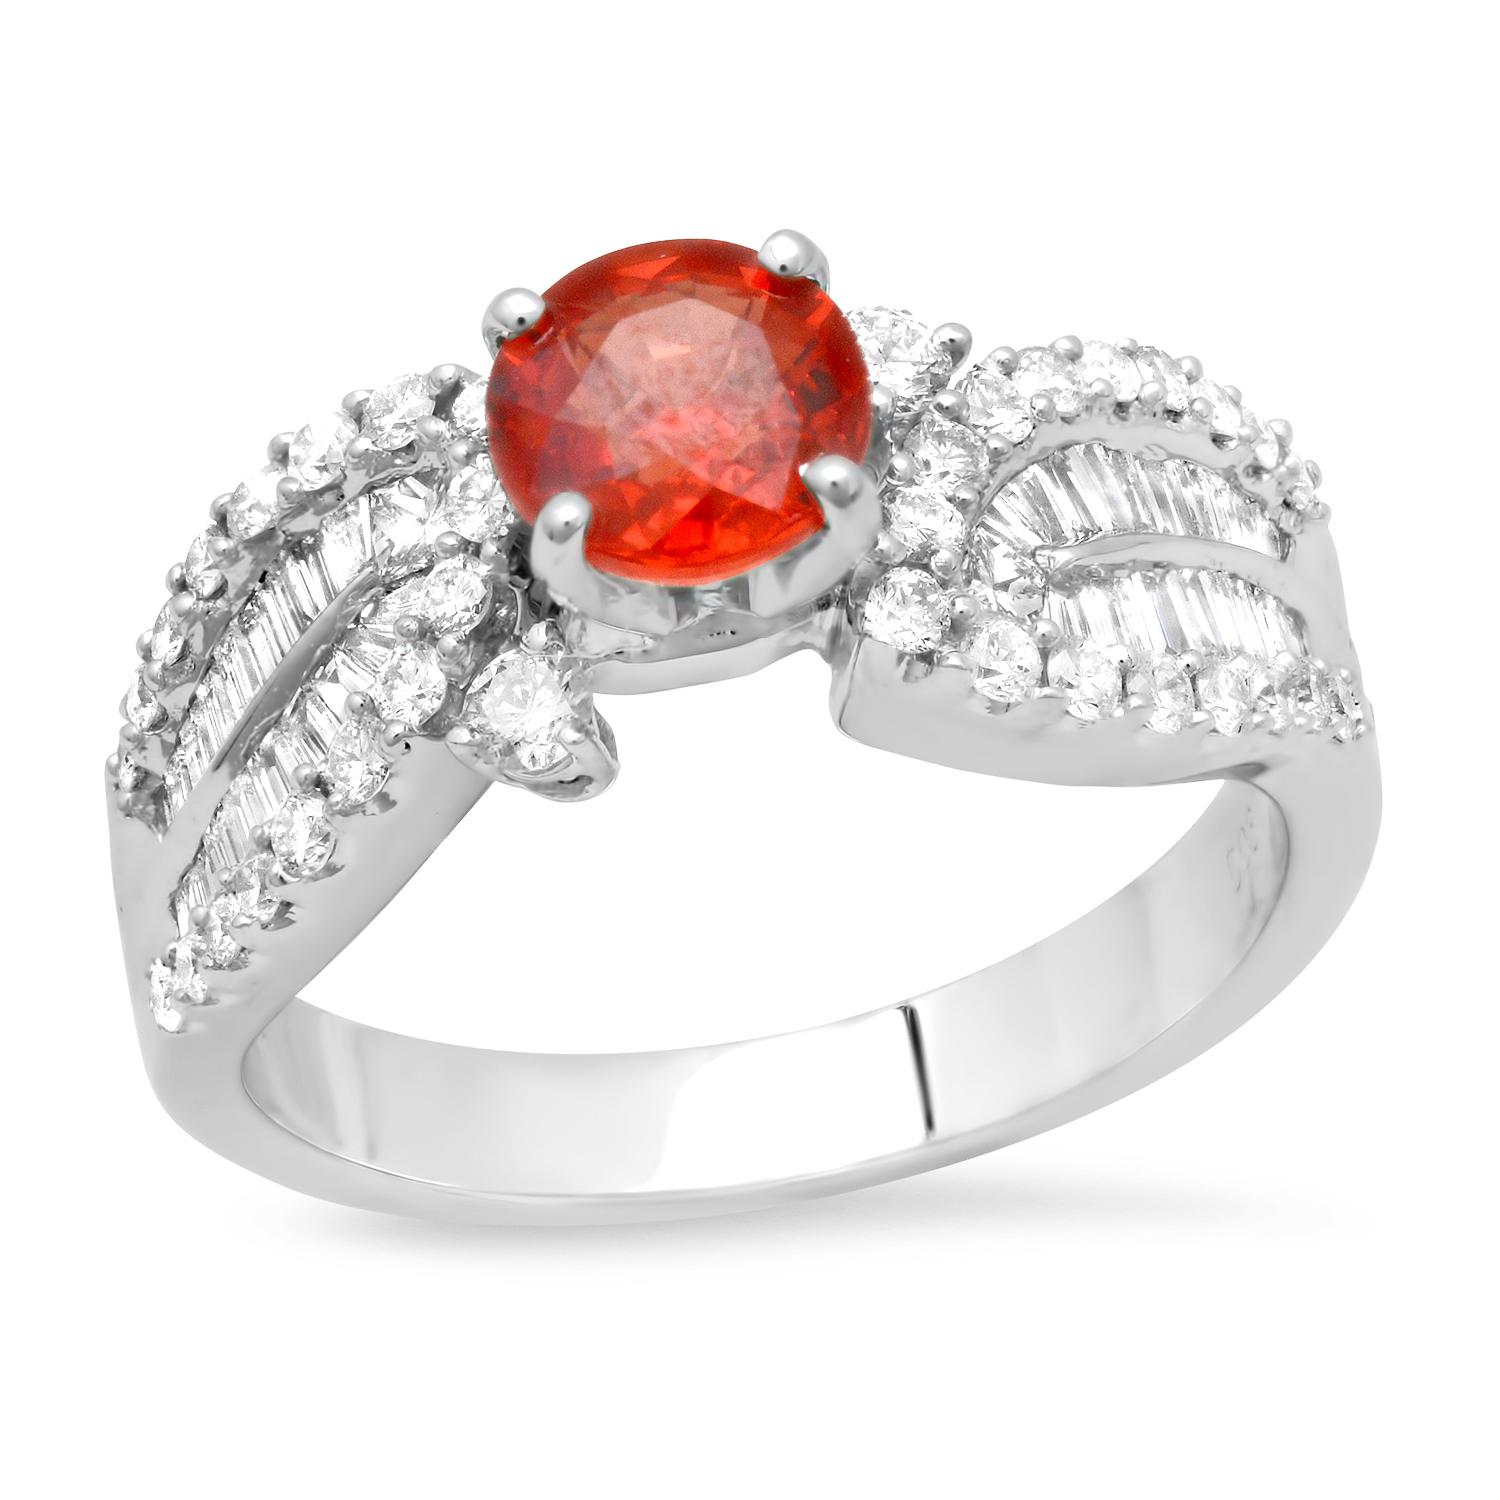 18K White Gold Setting with 1.17ct Orange Sapphire and 0.87ct Diamond Ring